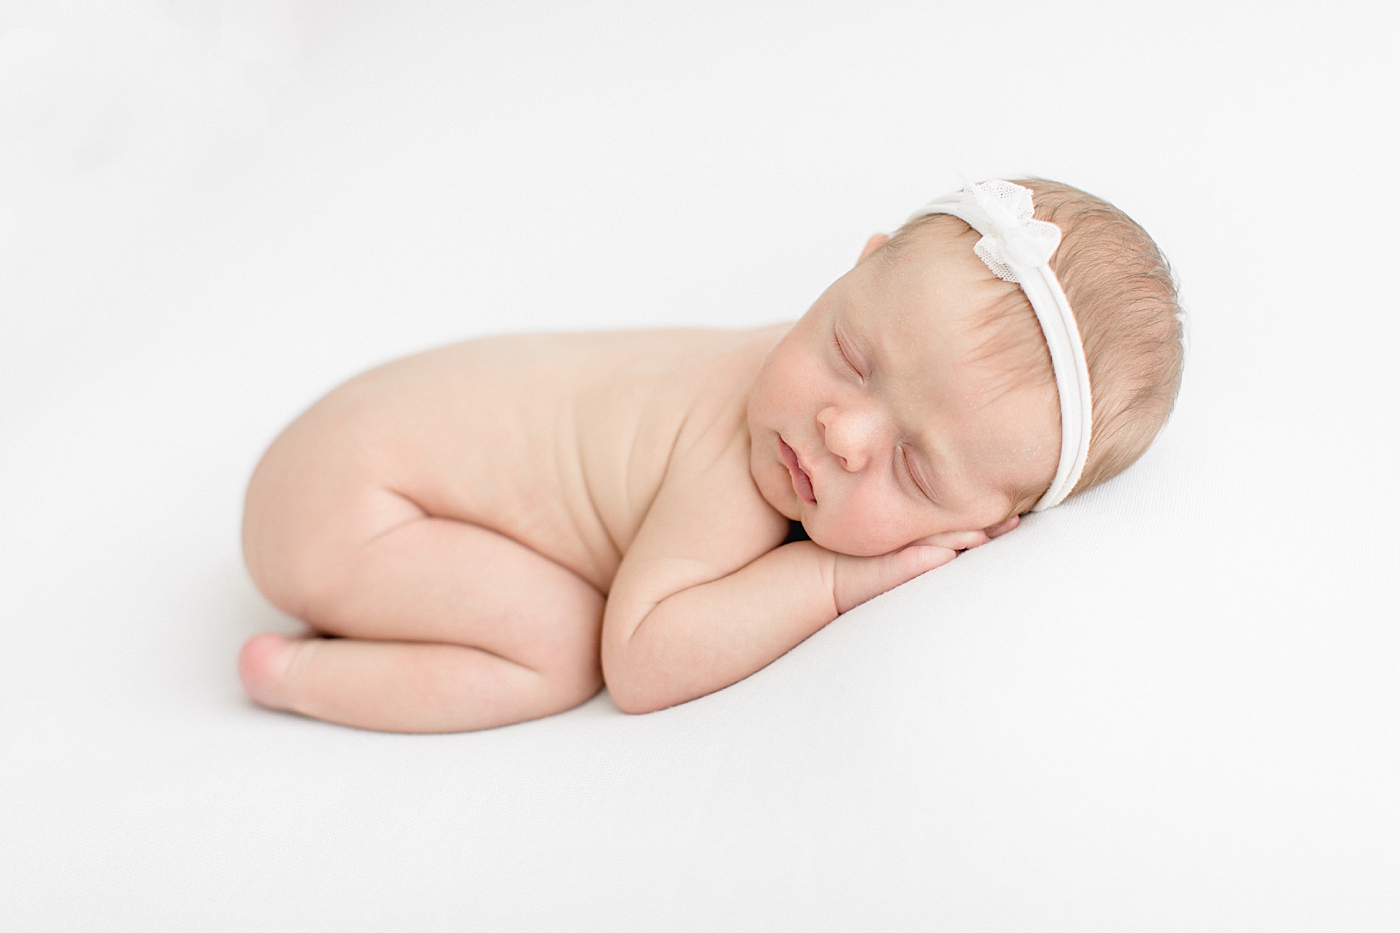 Baby girl curled up on her stomach for newborn photos. Photo by Brittany Elise Photography.